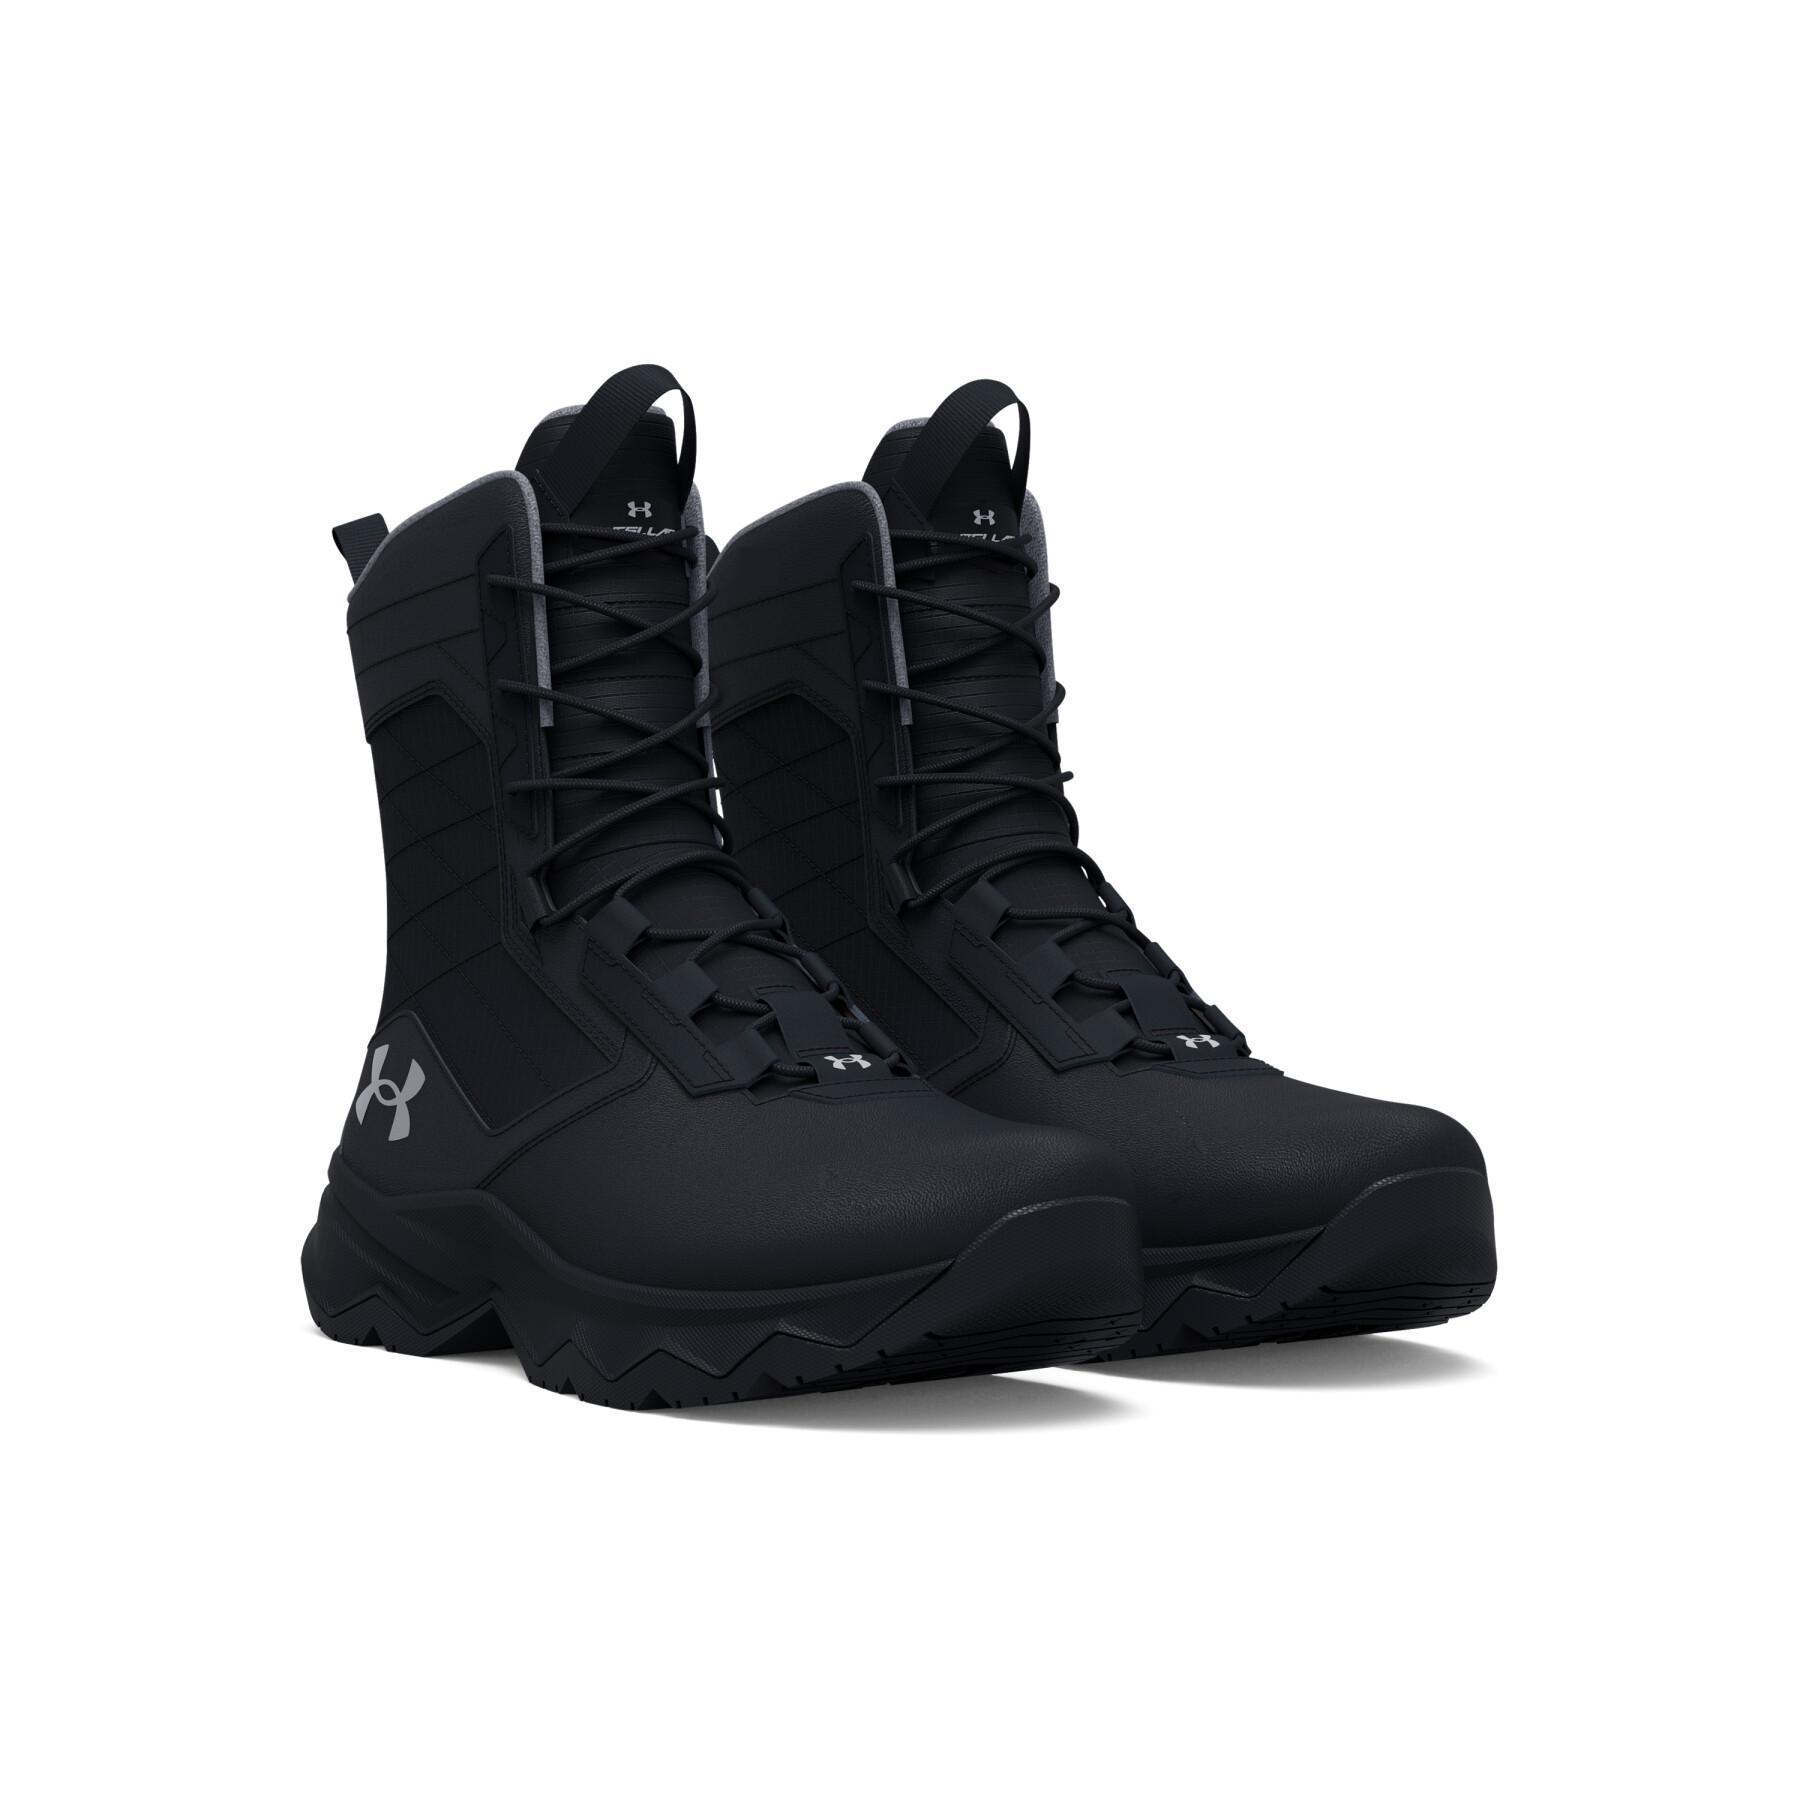 Hiking shoes Under Armour Stellar G2 Tactical - Under Armour - Mens Shoes